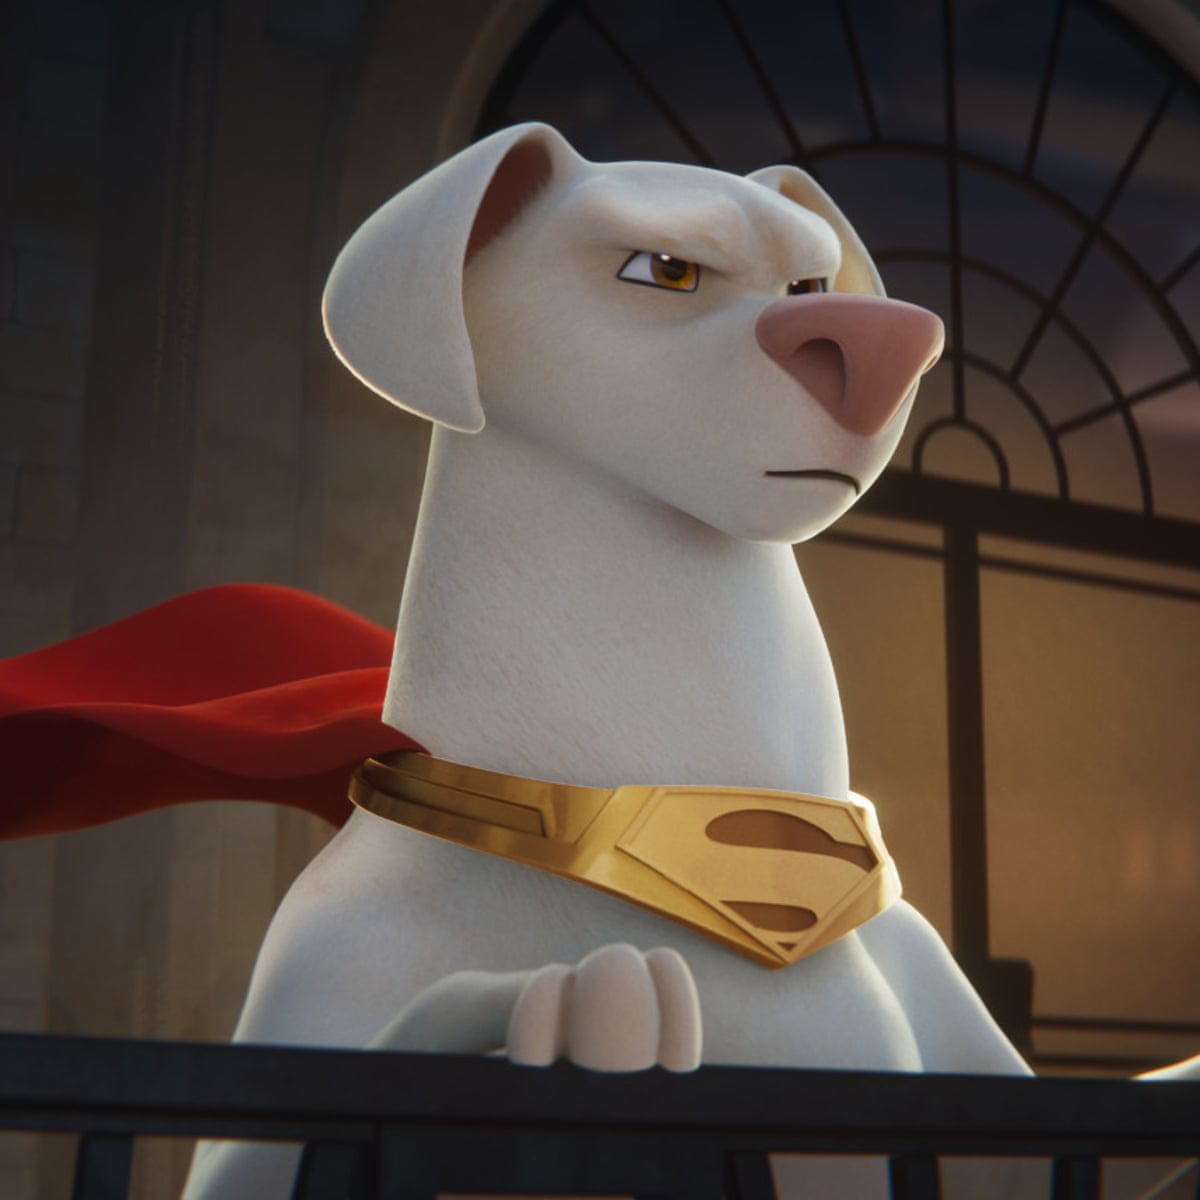 DC League of Super-Pets review – all-star cast carries cute superhero romp  | Movies | The Guardian